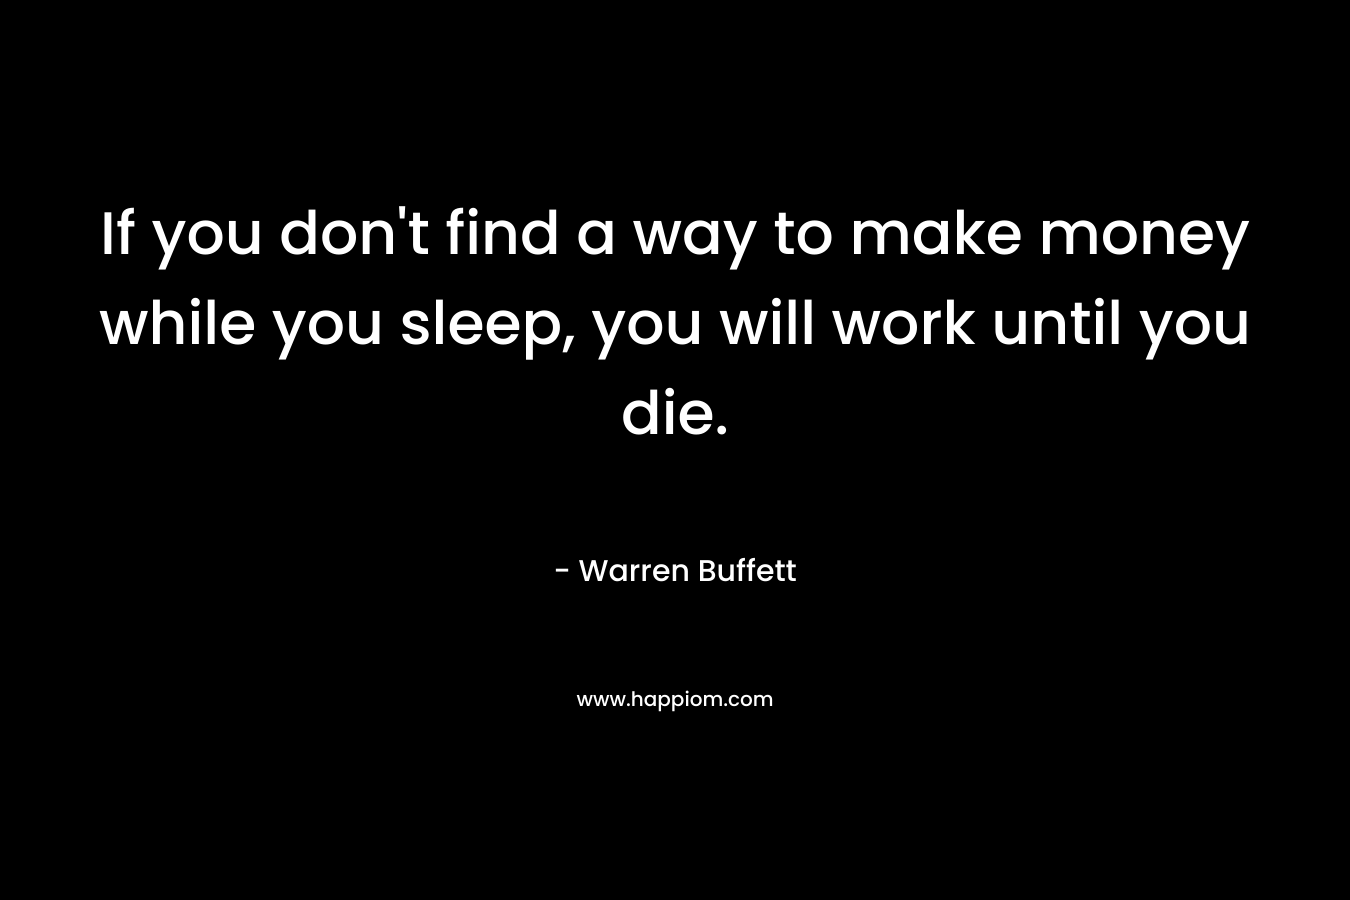 If you don't find a way to make money while you sleep, you will work until you die.